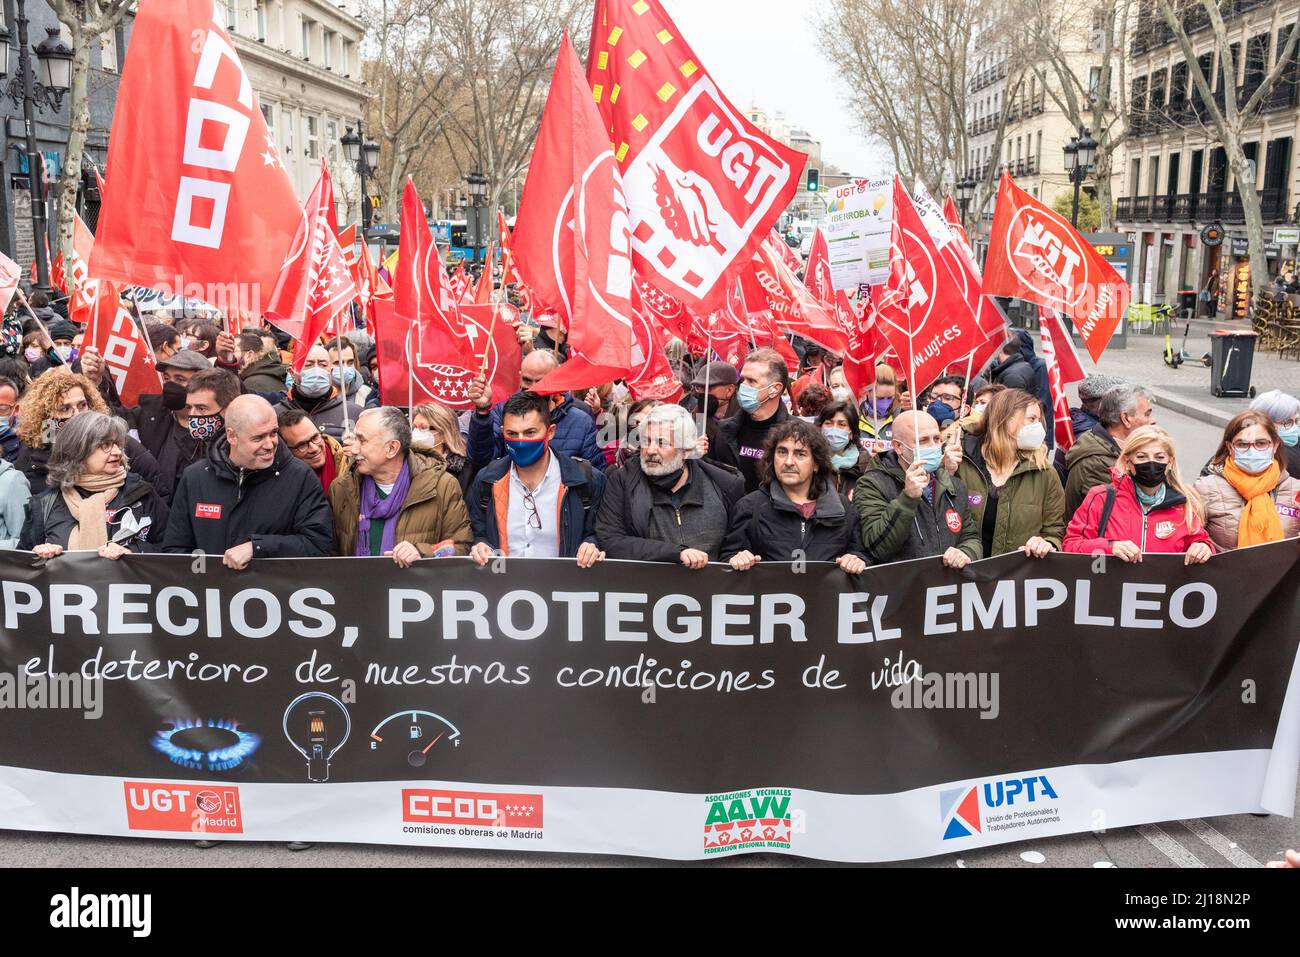 Madrid, Spain, 23rd mar 2022. Labor Unions and consumer organisations protest in a demonstration against the energy and foods price increase, caused by the Ukraine-Russia war. CCOO and UGT, with their presidents Unai Sordo and Pepe Alvarez, together with UPTA, Uatae and Facua, start the demonstration from Atocha to Plaza Jacinto benavente. The protest take place just a day before the 24th and 25th European Council summit where leaders and politicians will discuss Russian military aggression against Ukraine. Credit: Roberto Arosio/Alamy Live News Stock Photo